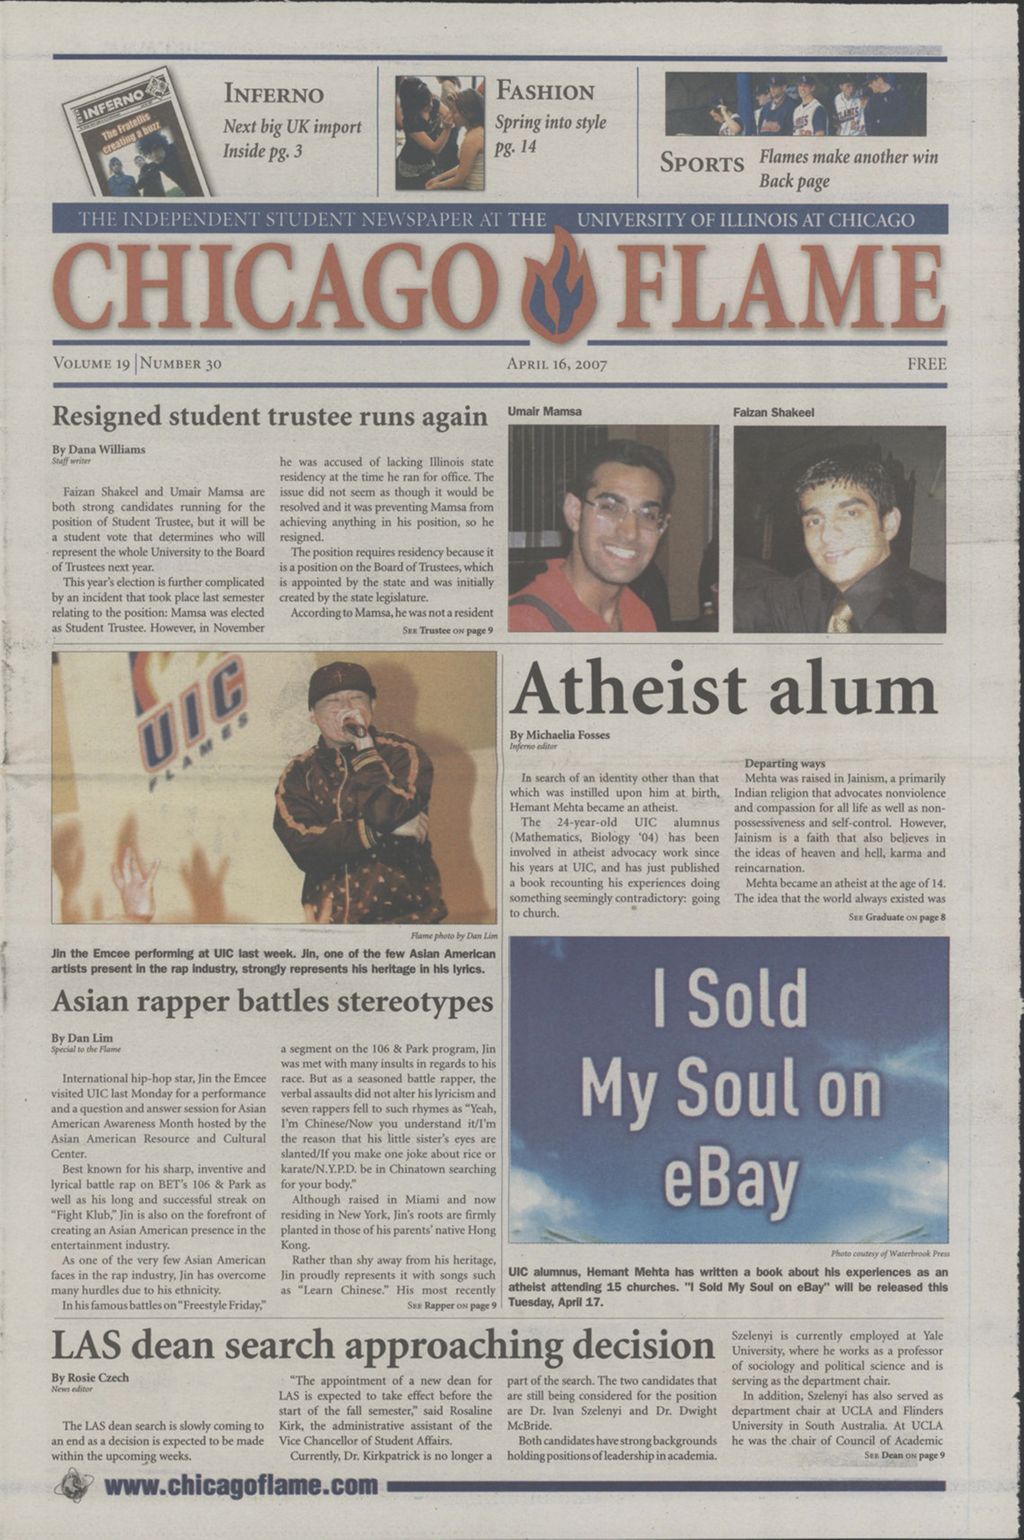 Miniature of Chicago Flame (April 16, 2007)